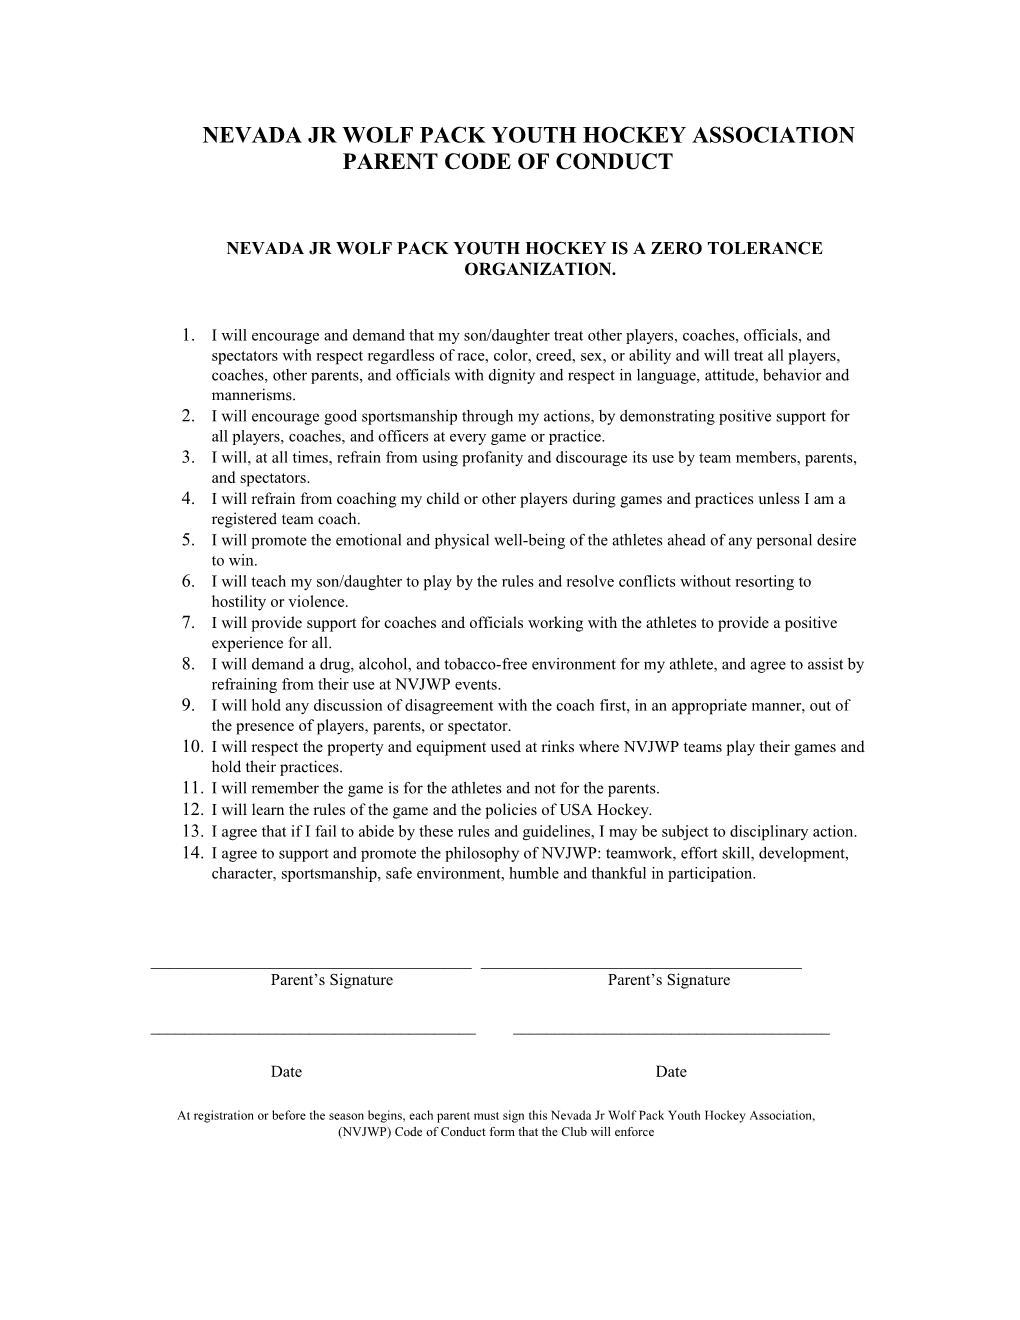 Nevada Jr Wolf Pack Youth Hockey Association Parent Code of Conduct